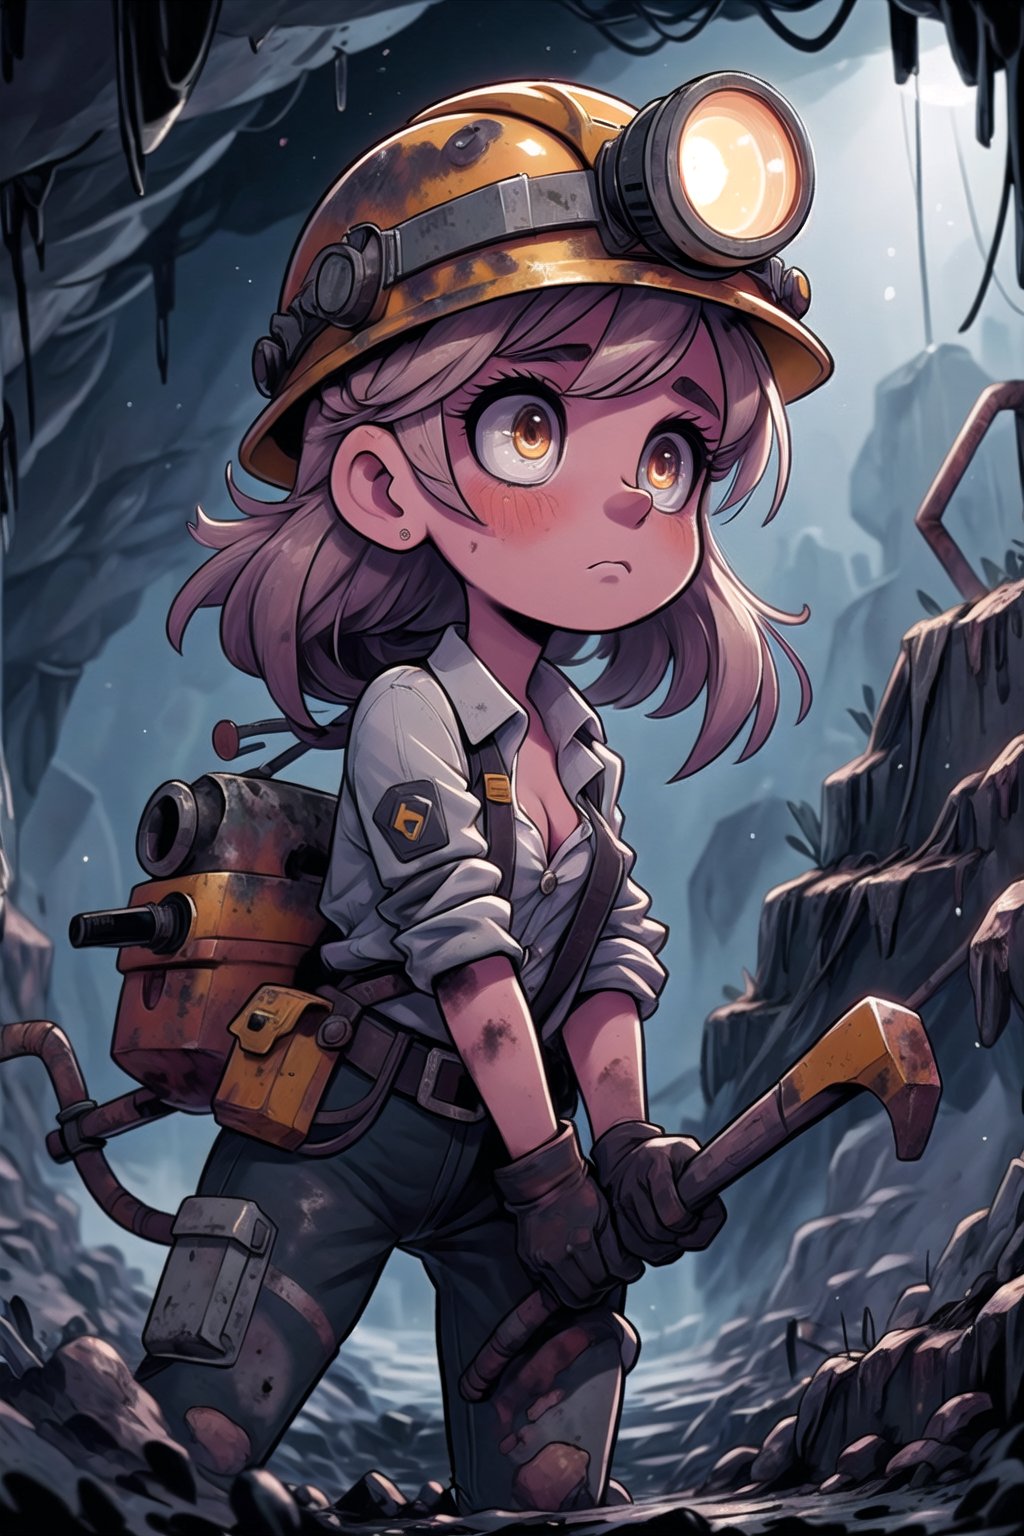 girl, miner, pickaxe, unbuttoned shirt, dusty environment, rugged attire, mining equipment, helmet with headlamp, gritty appearance, determined expression, underground cavern, dim lighting, veins of ore, cavernous depths, industrial machinery, hardworking demeanor.,MiNr,helmet